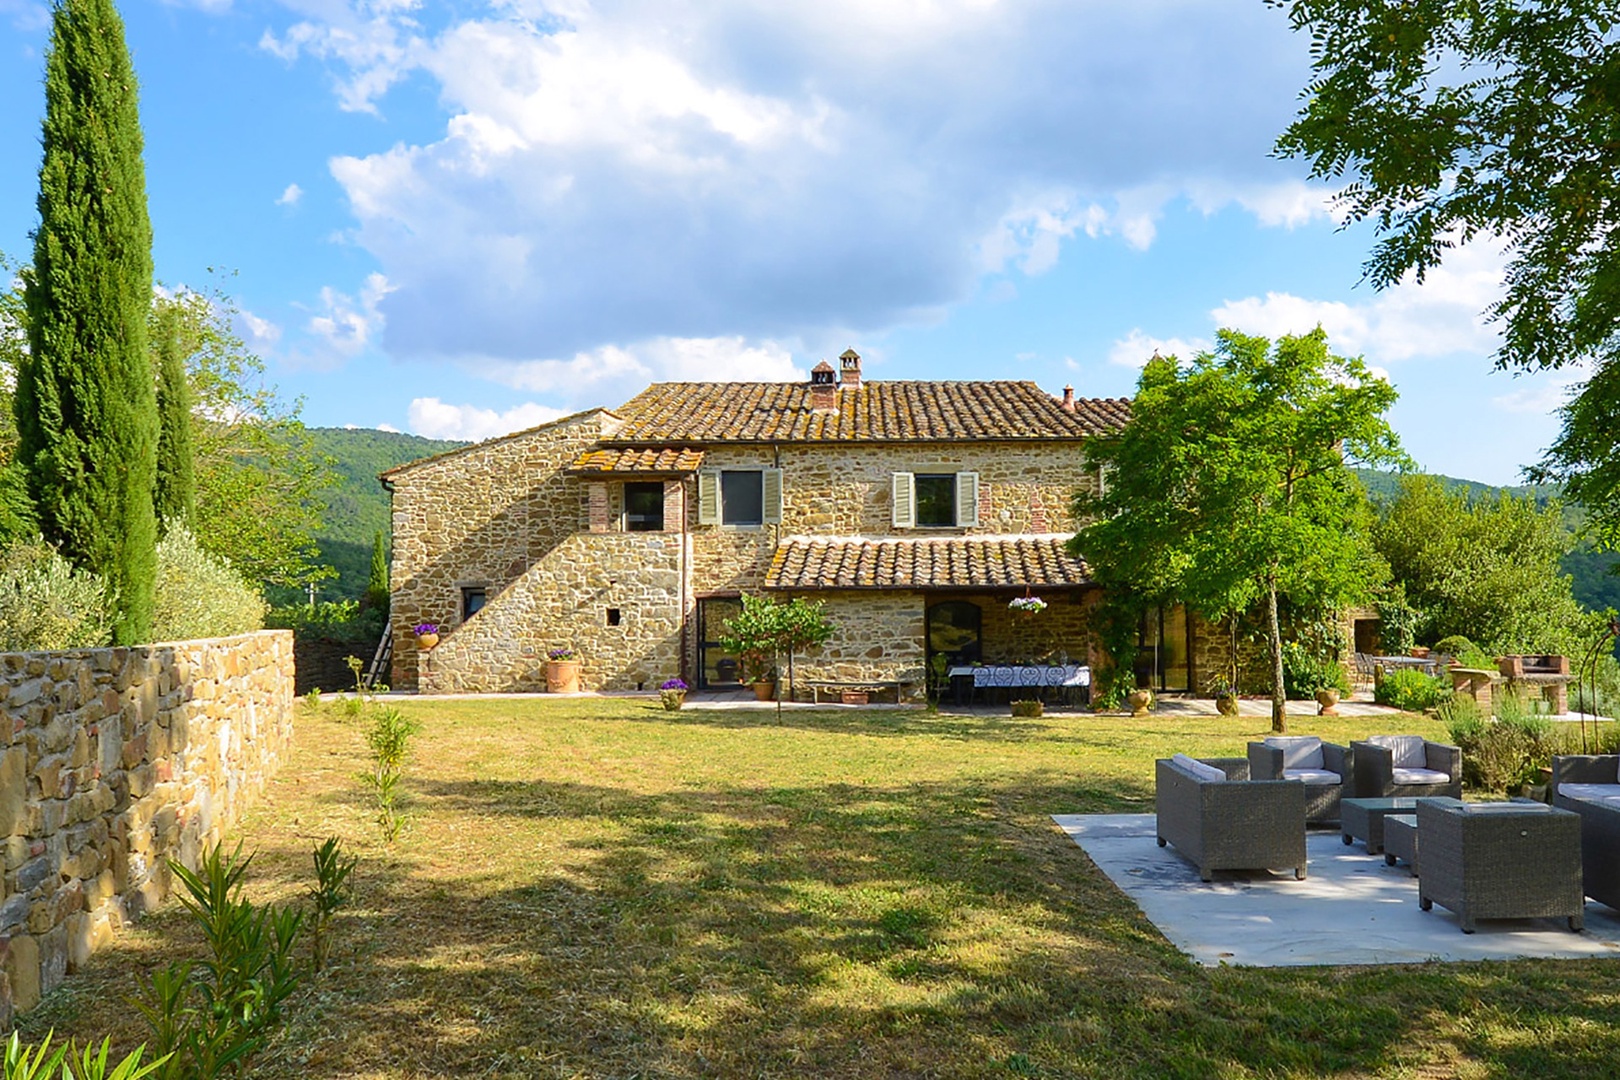 La Collina is a beautiful Tuscan style stone country house